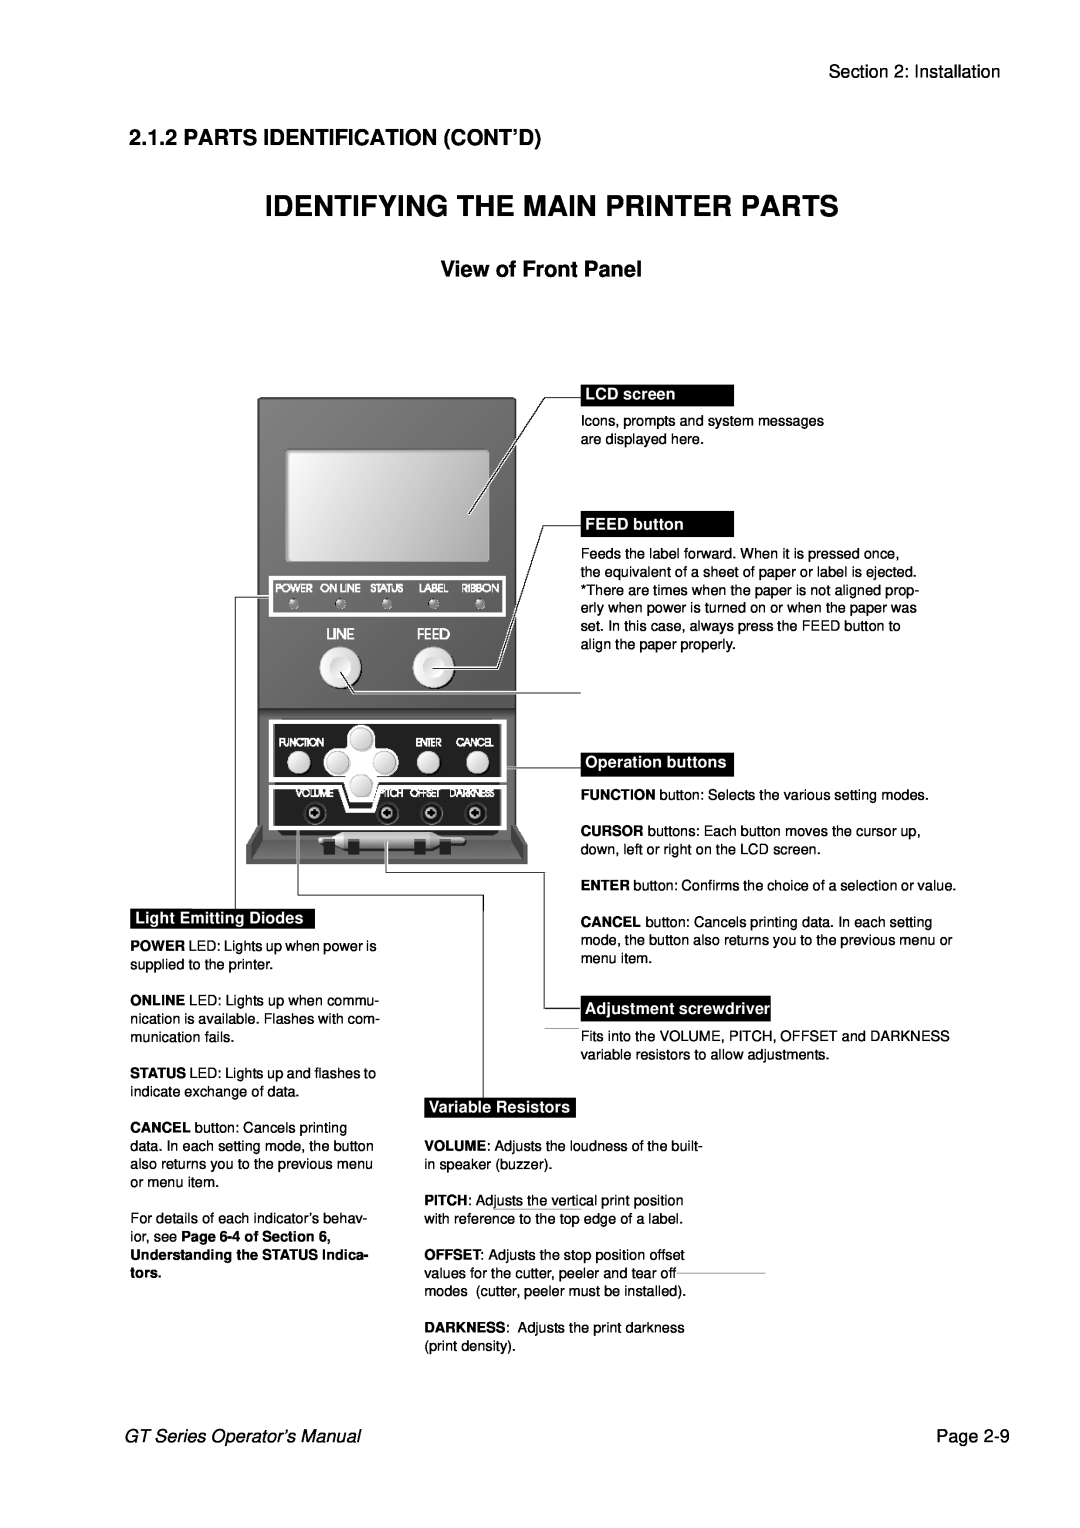 SATO GT424 manual View of Front Panel, Identifying The Main Printer Parts, Parts Identification Cont’D, Page, LCD screen 